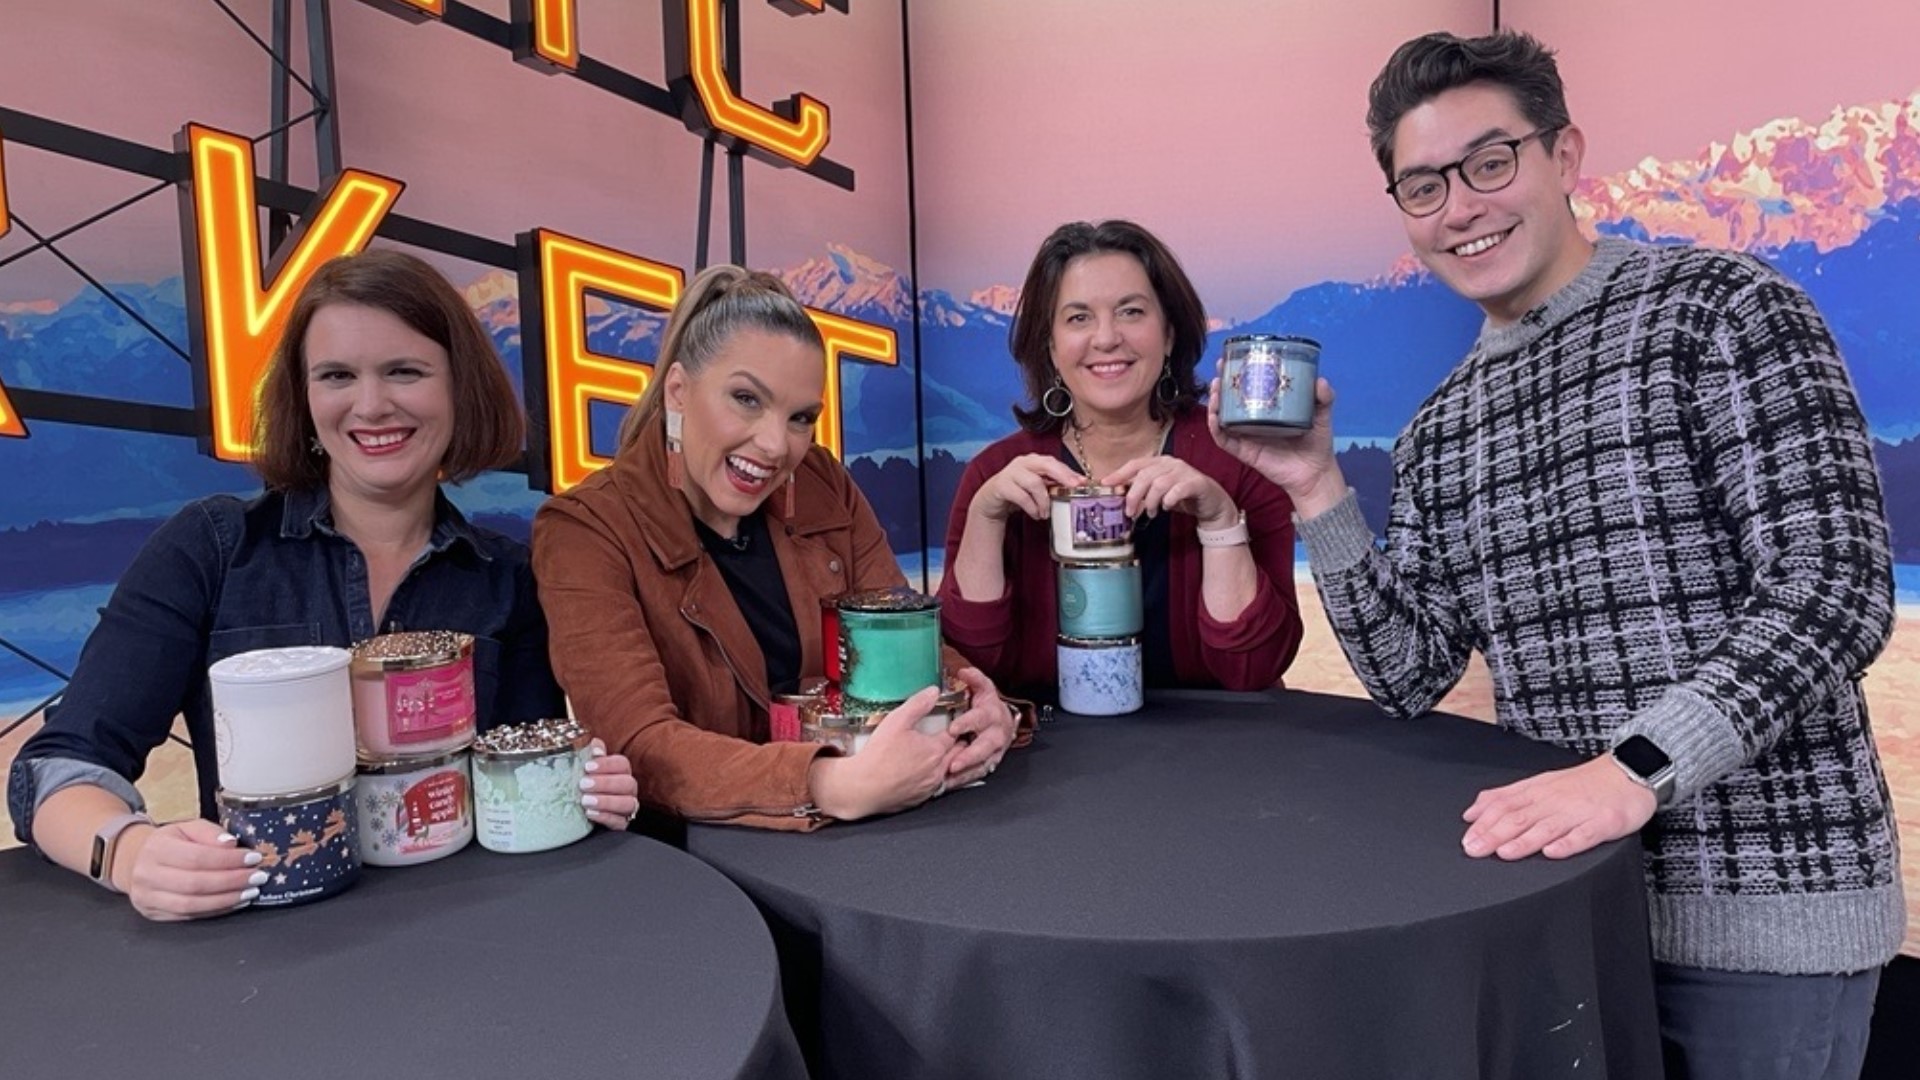 Is it Frozen Lake or Falling Flurries? We put Bath & Body Work’s holiday candles to the test as we tried to match the scent to the name. #newdaynw